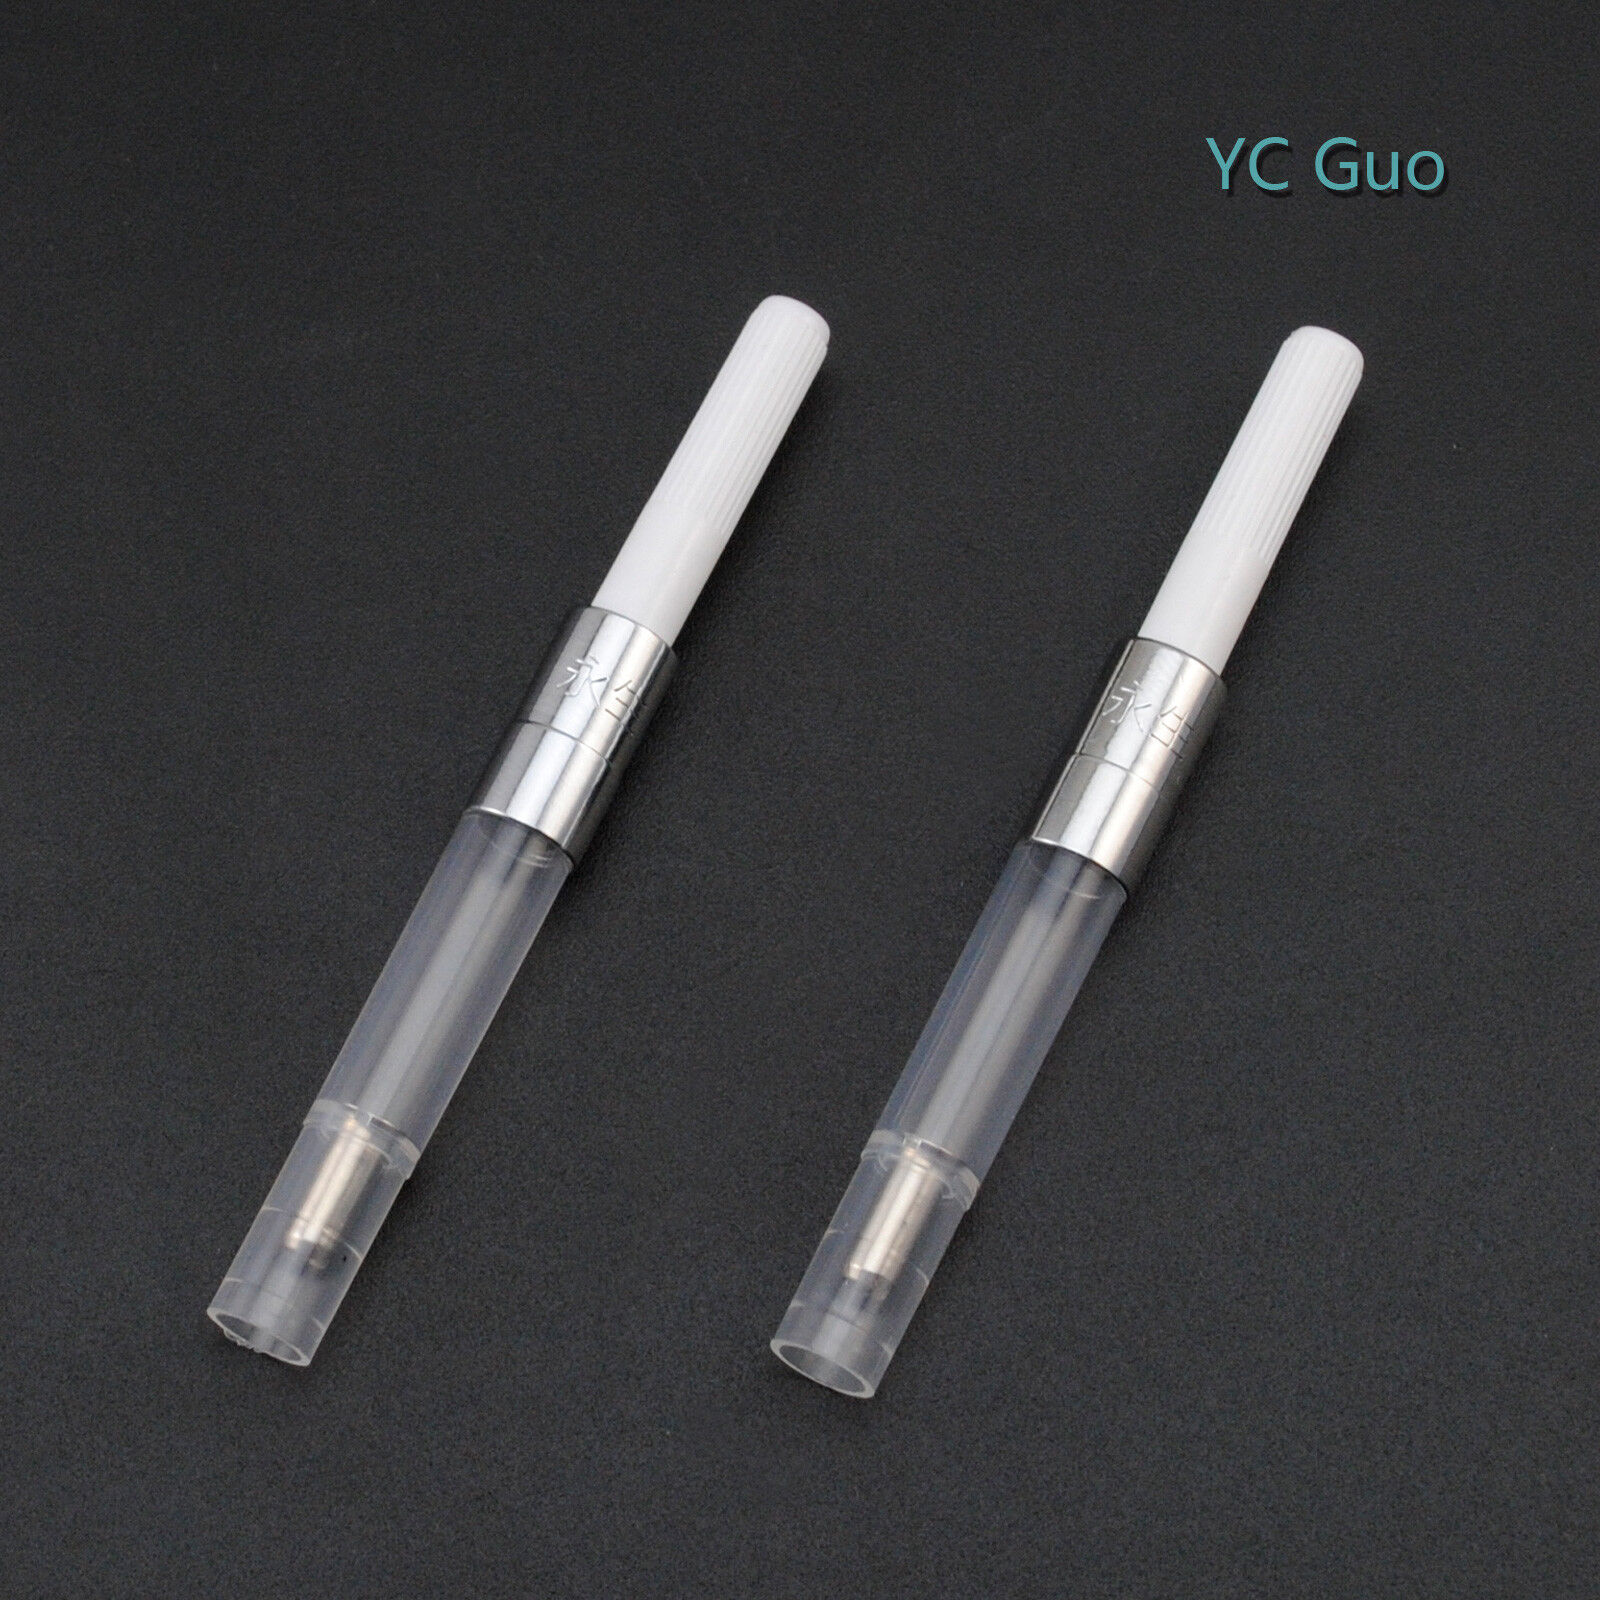 2X Converters For Wing Sung 659 Fountain Pen White For Transparent Version